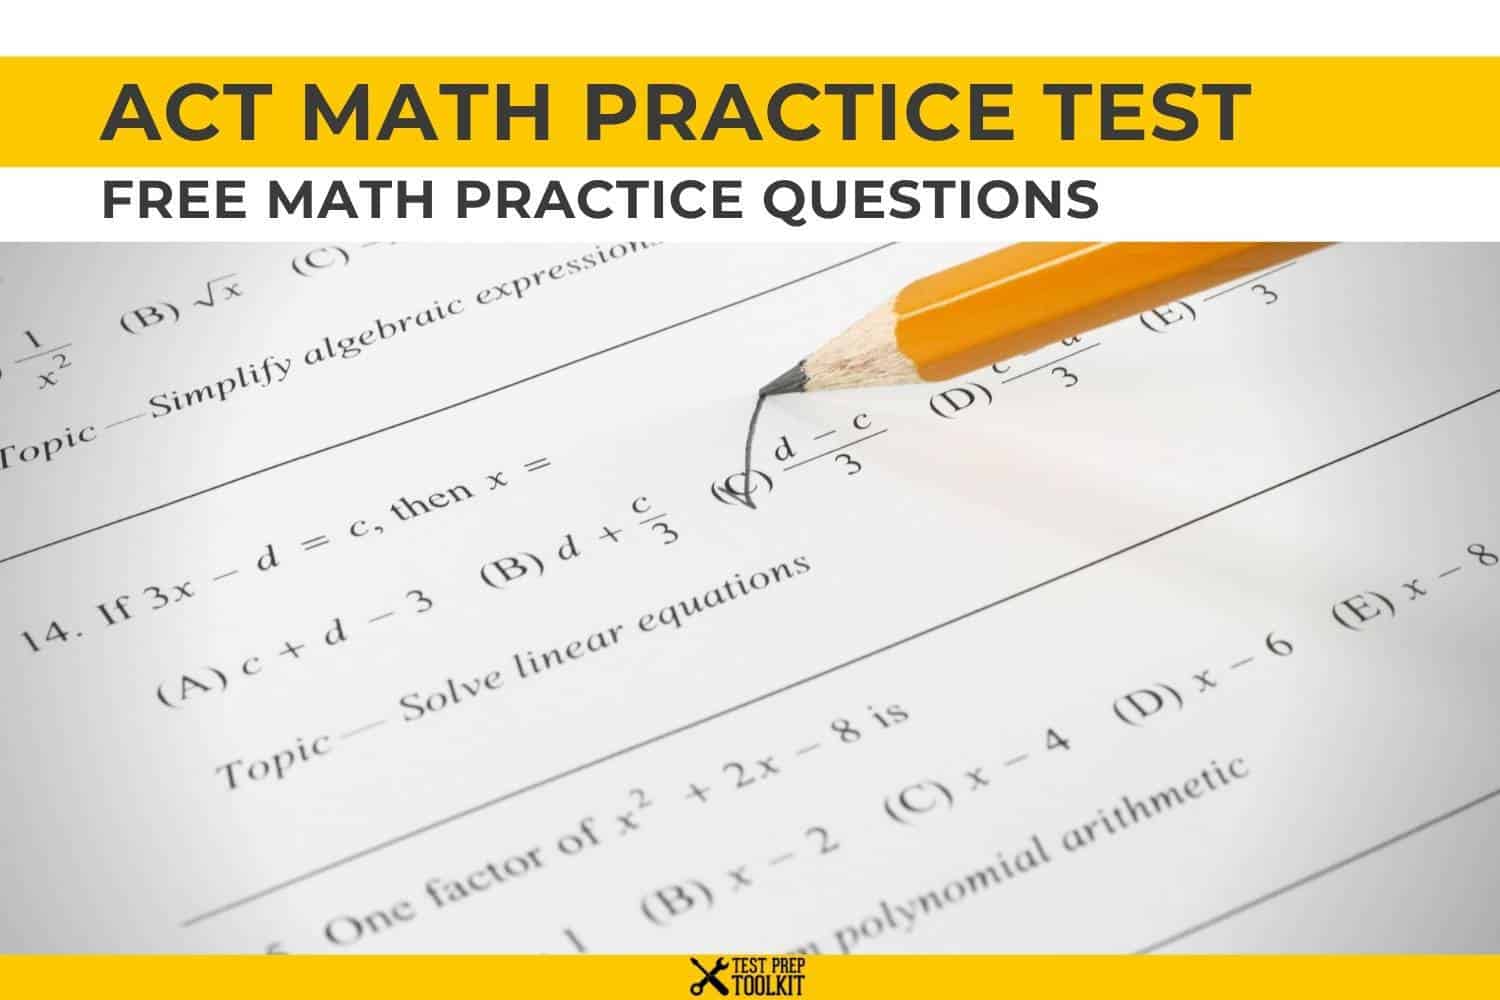 ACT Math Practice Test Free Math Practice Questions Test Prep Toolkit